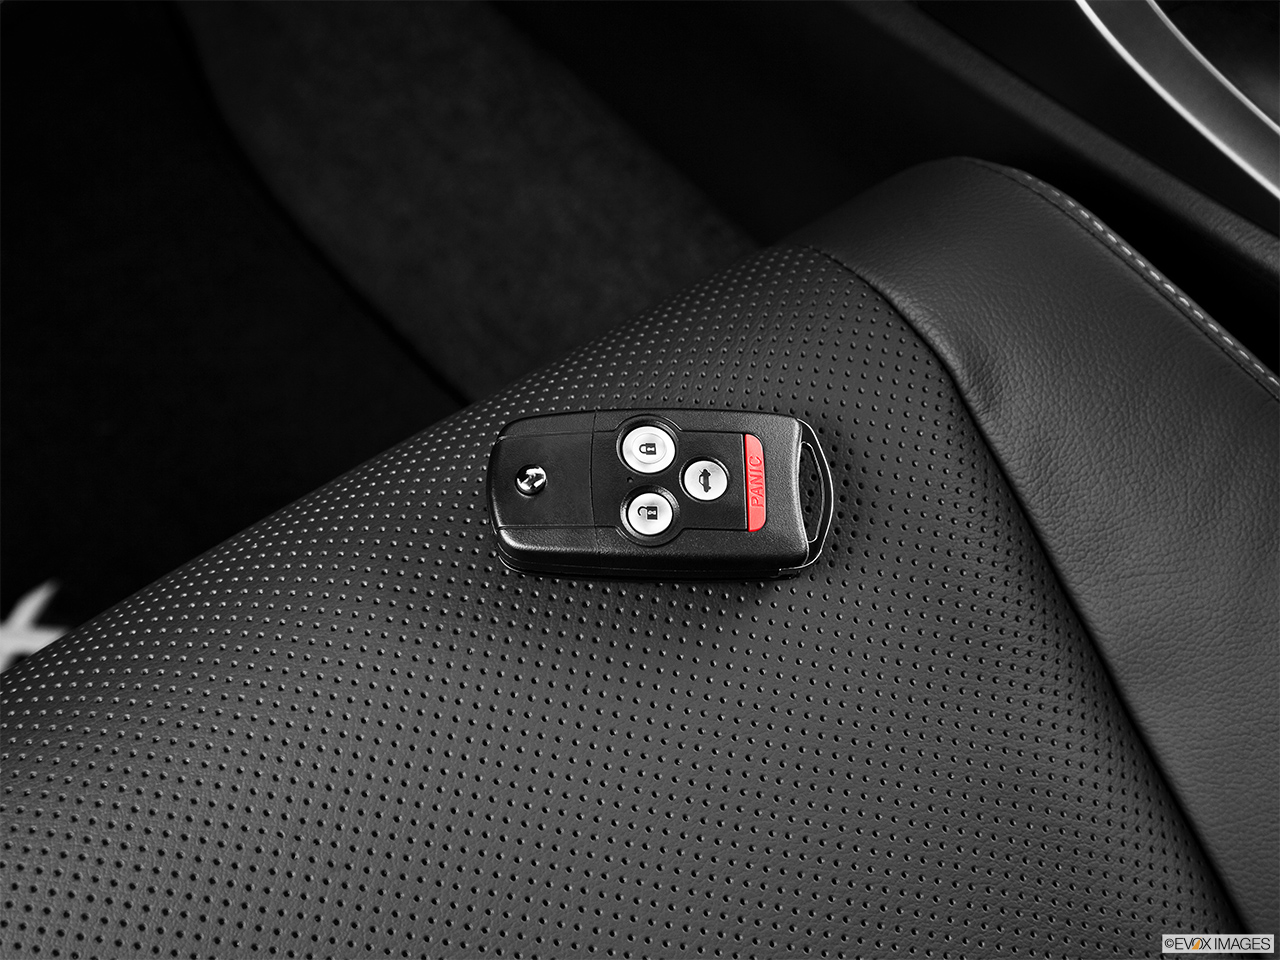 2013 Acura TSX 5-speed Automatic Key fob on driver's seat. 